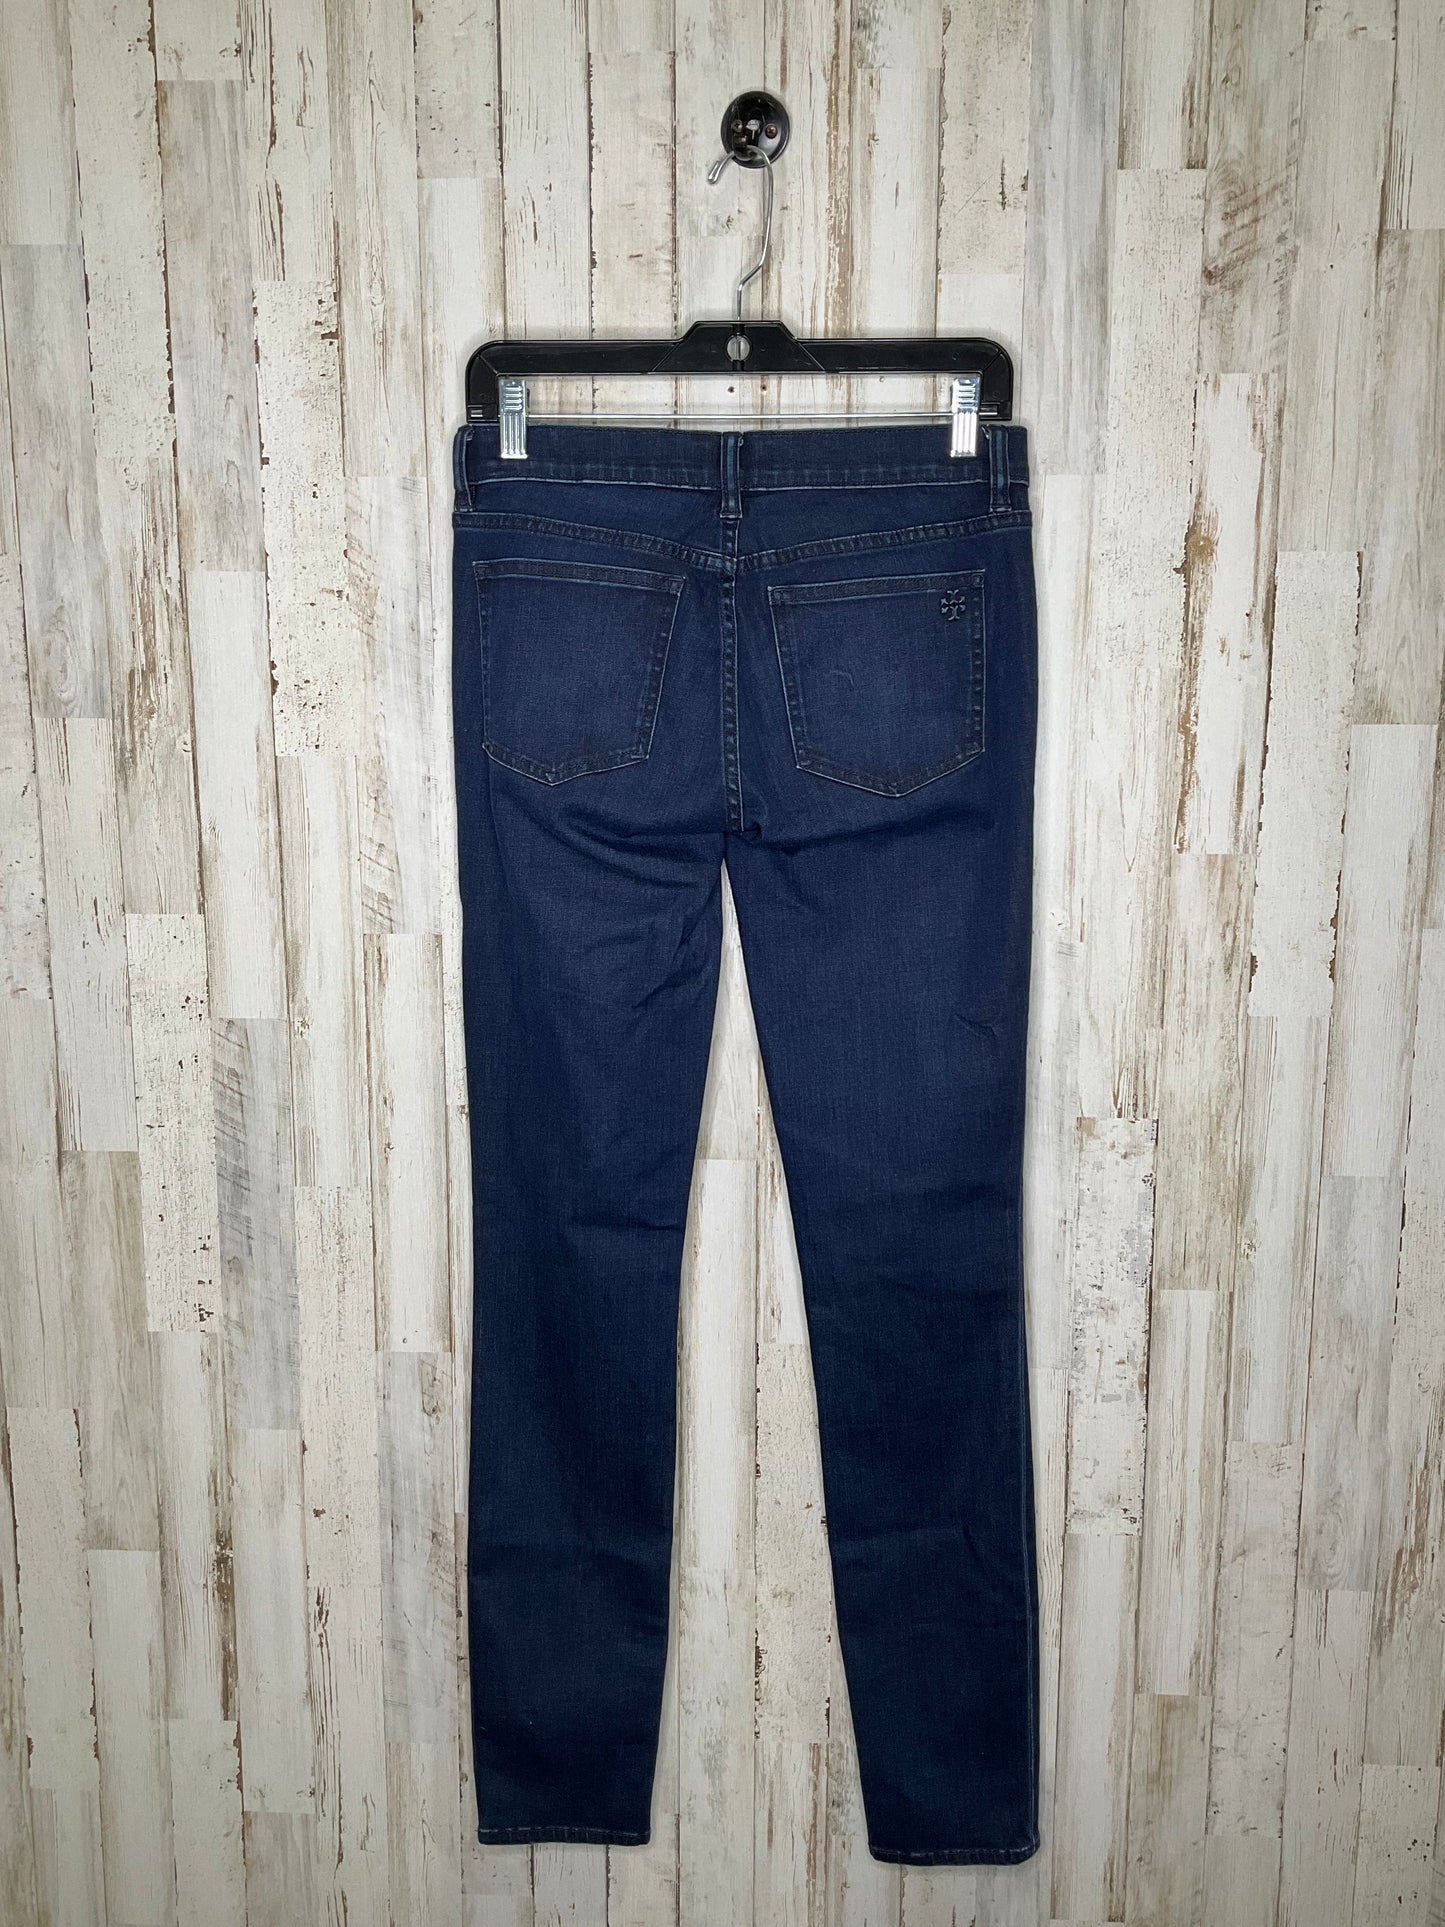 Jeans Skinny By Tory Burch  Size: 4